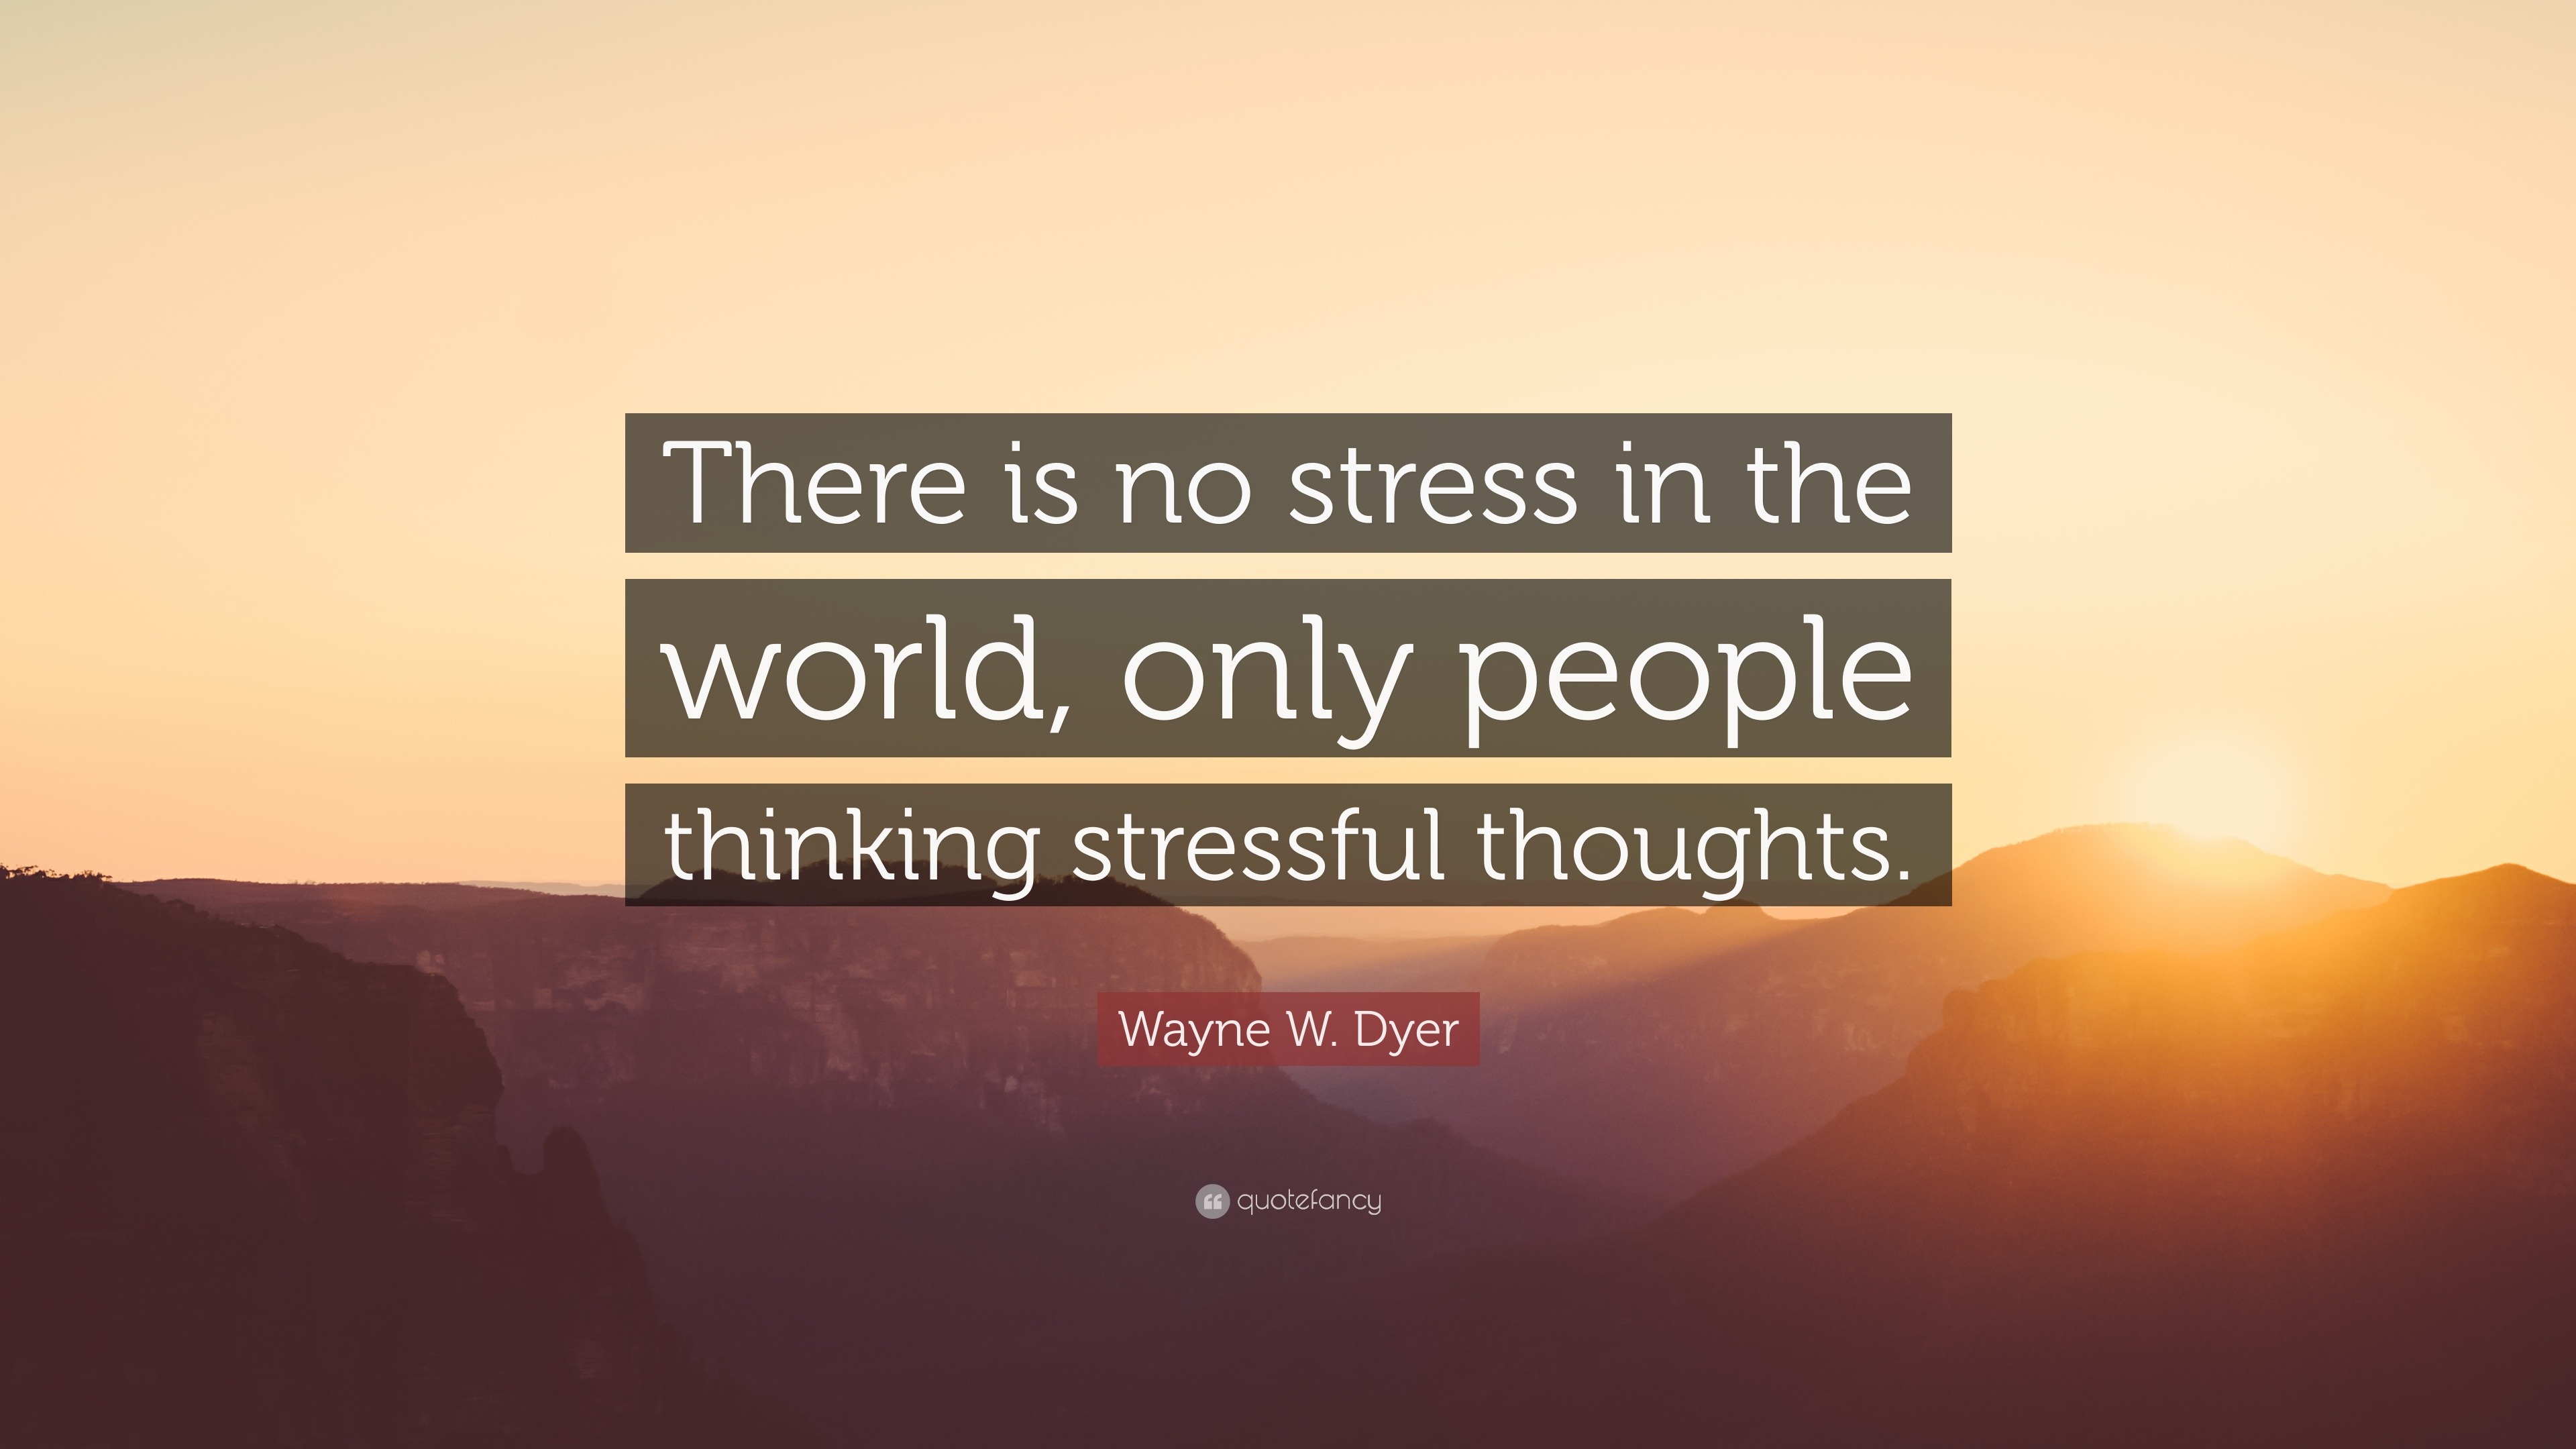 Wayne W. Dyer Quote: “There is no stress in the world, only people thinking  stressful thoughts.”